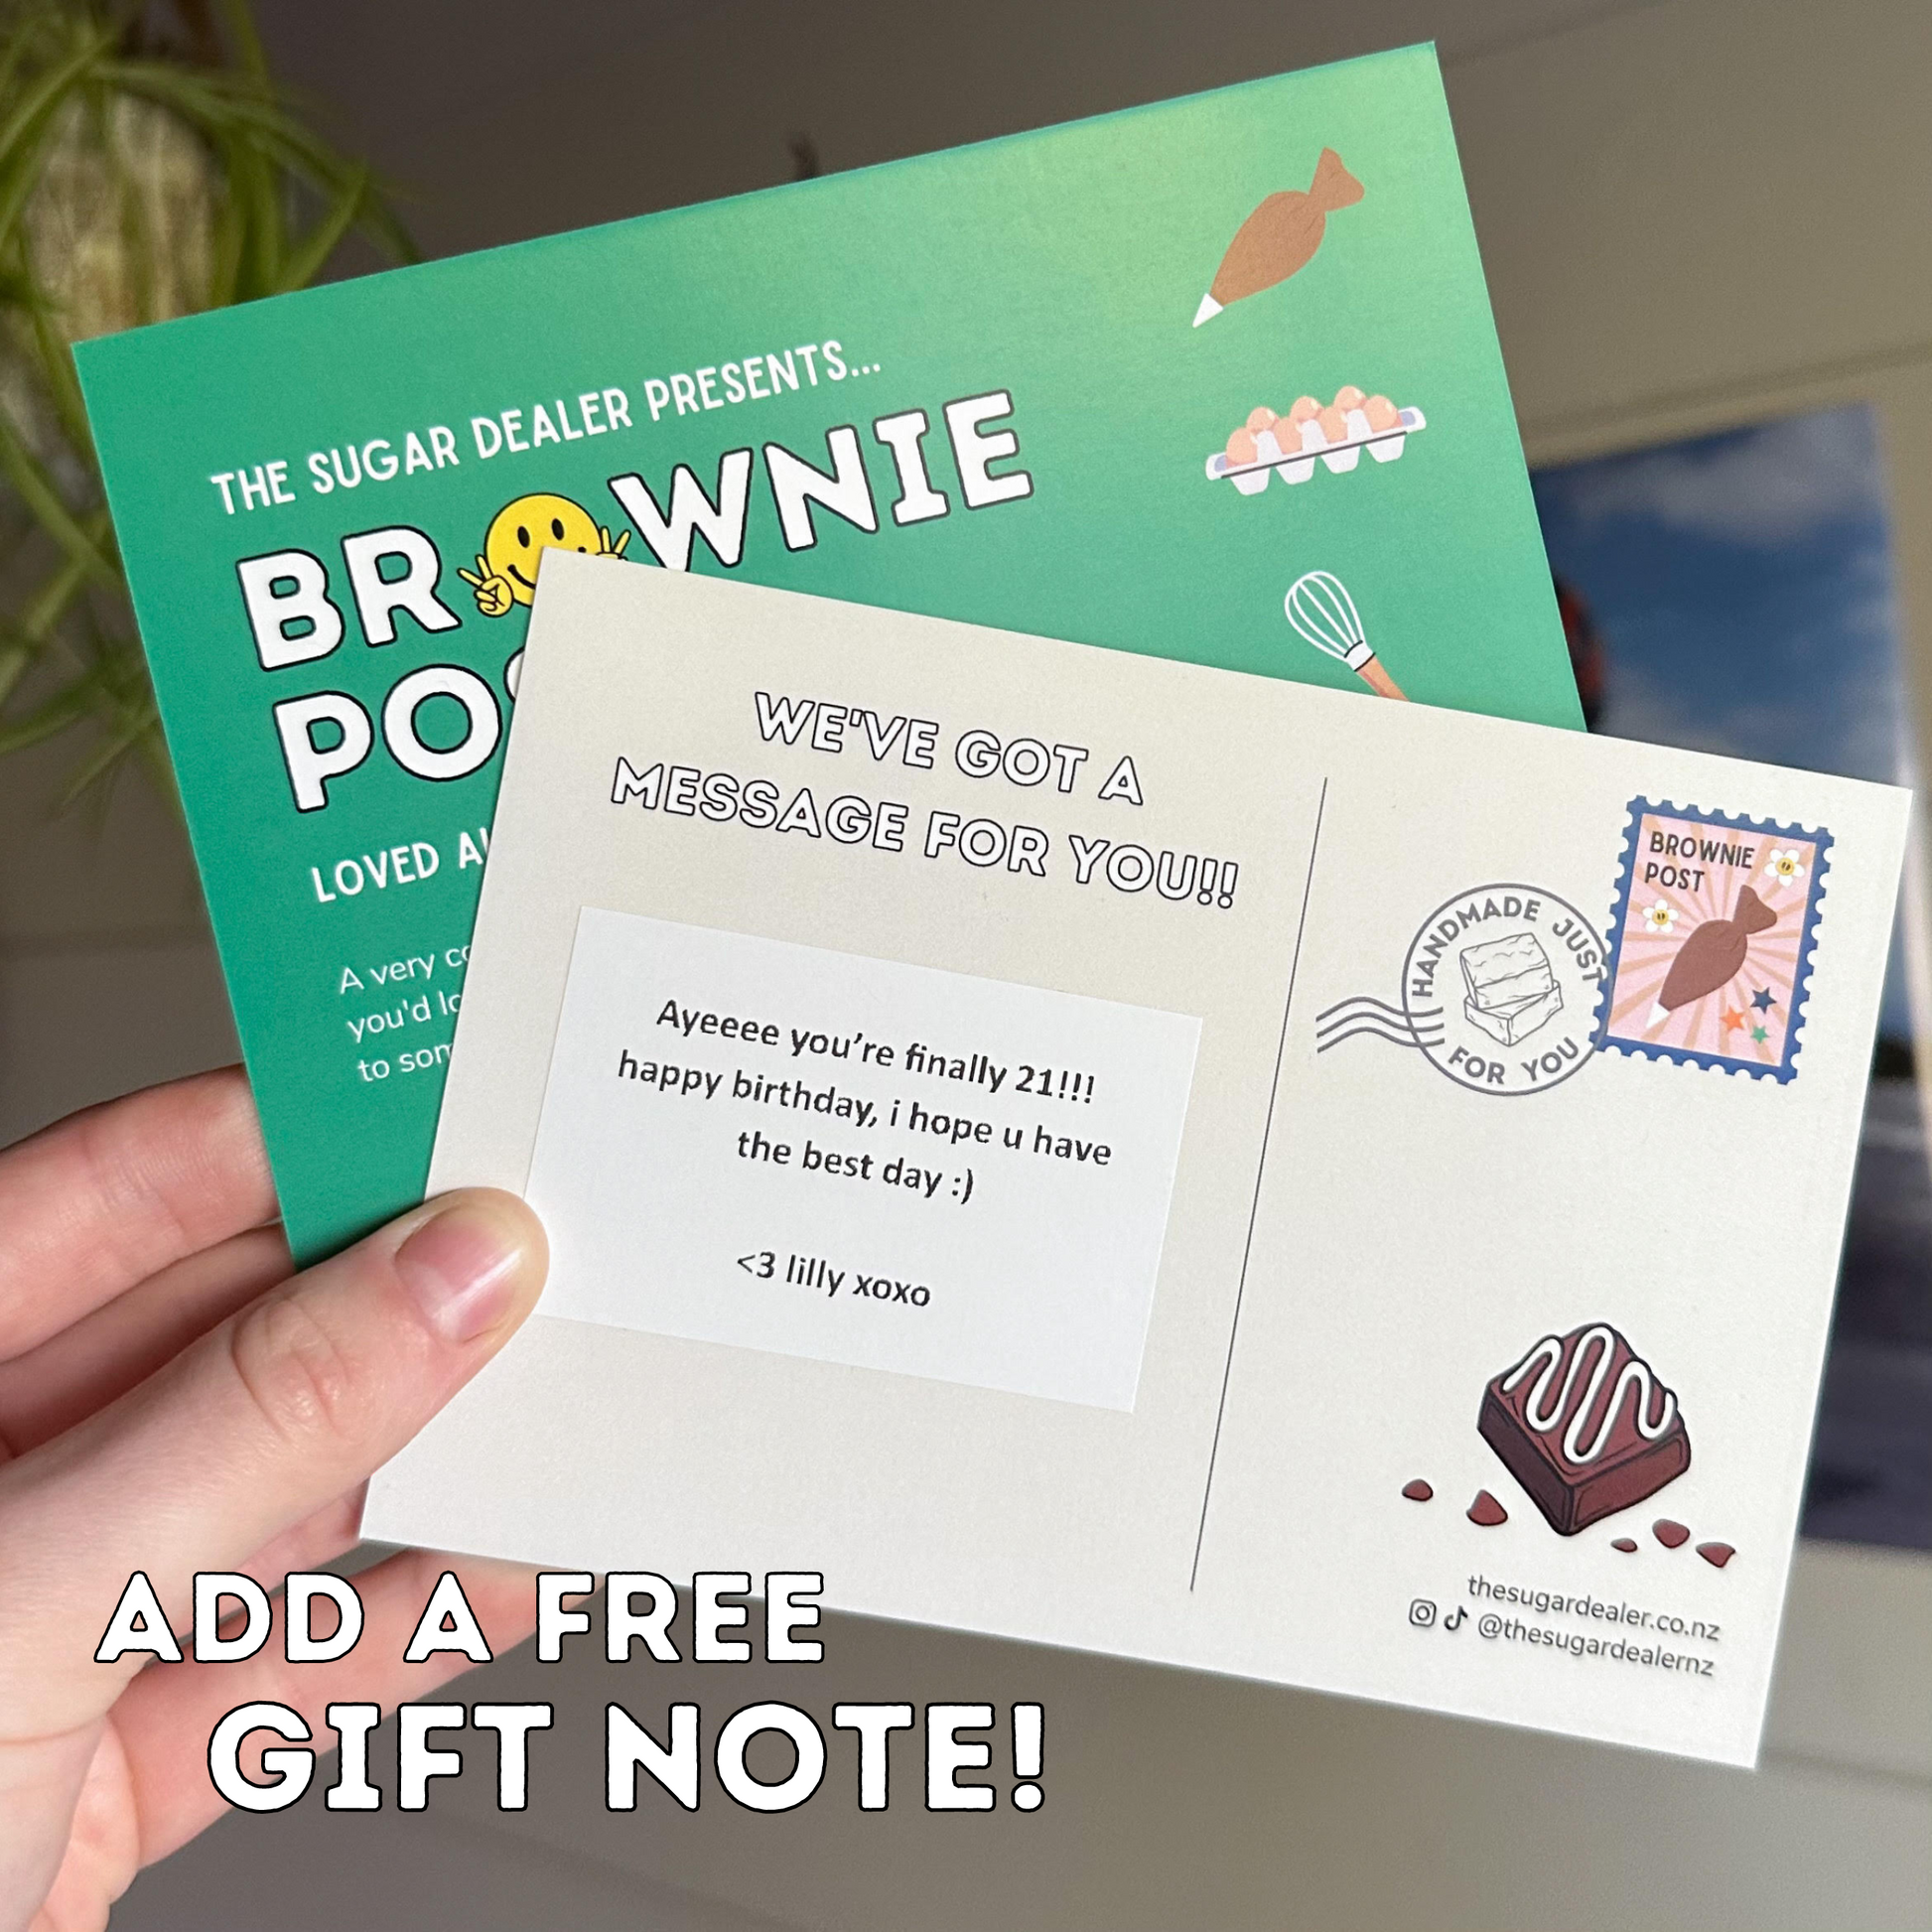 Are you gifting your brownie to someone? Add a free personalised gift note!